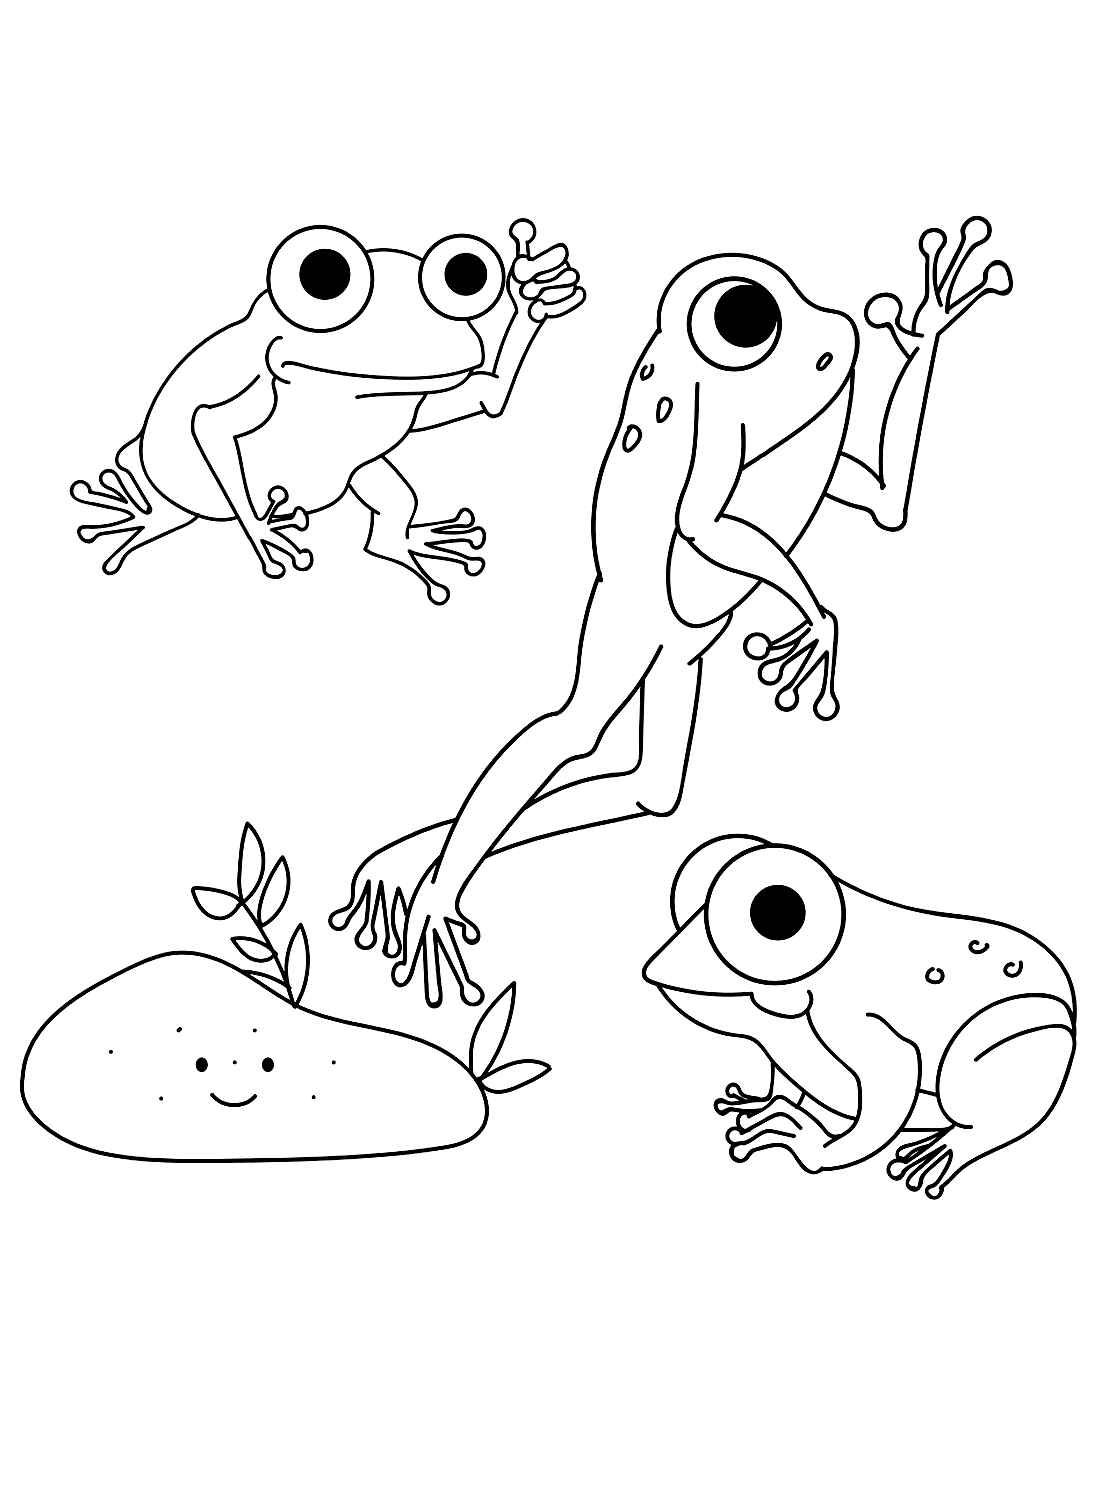 Frogs printable